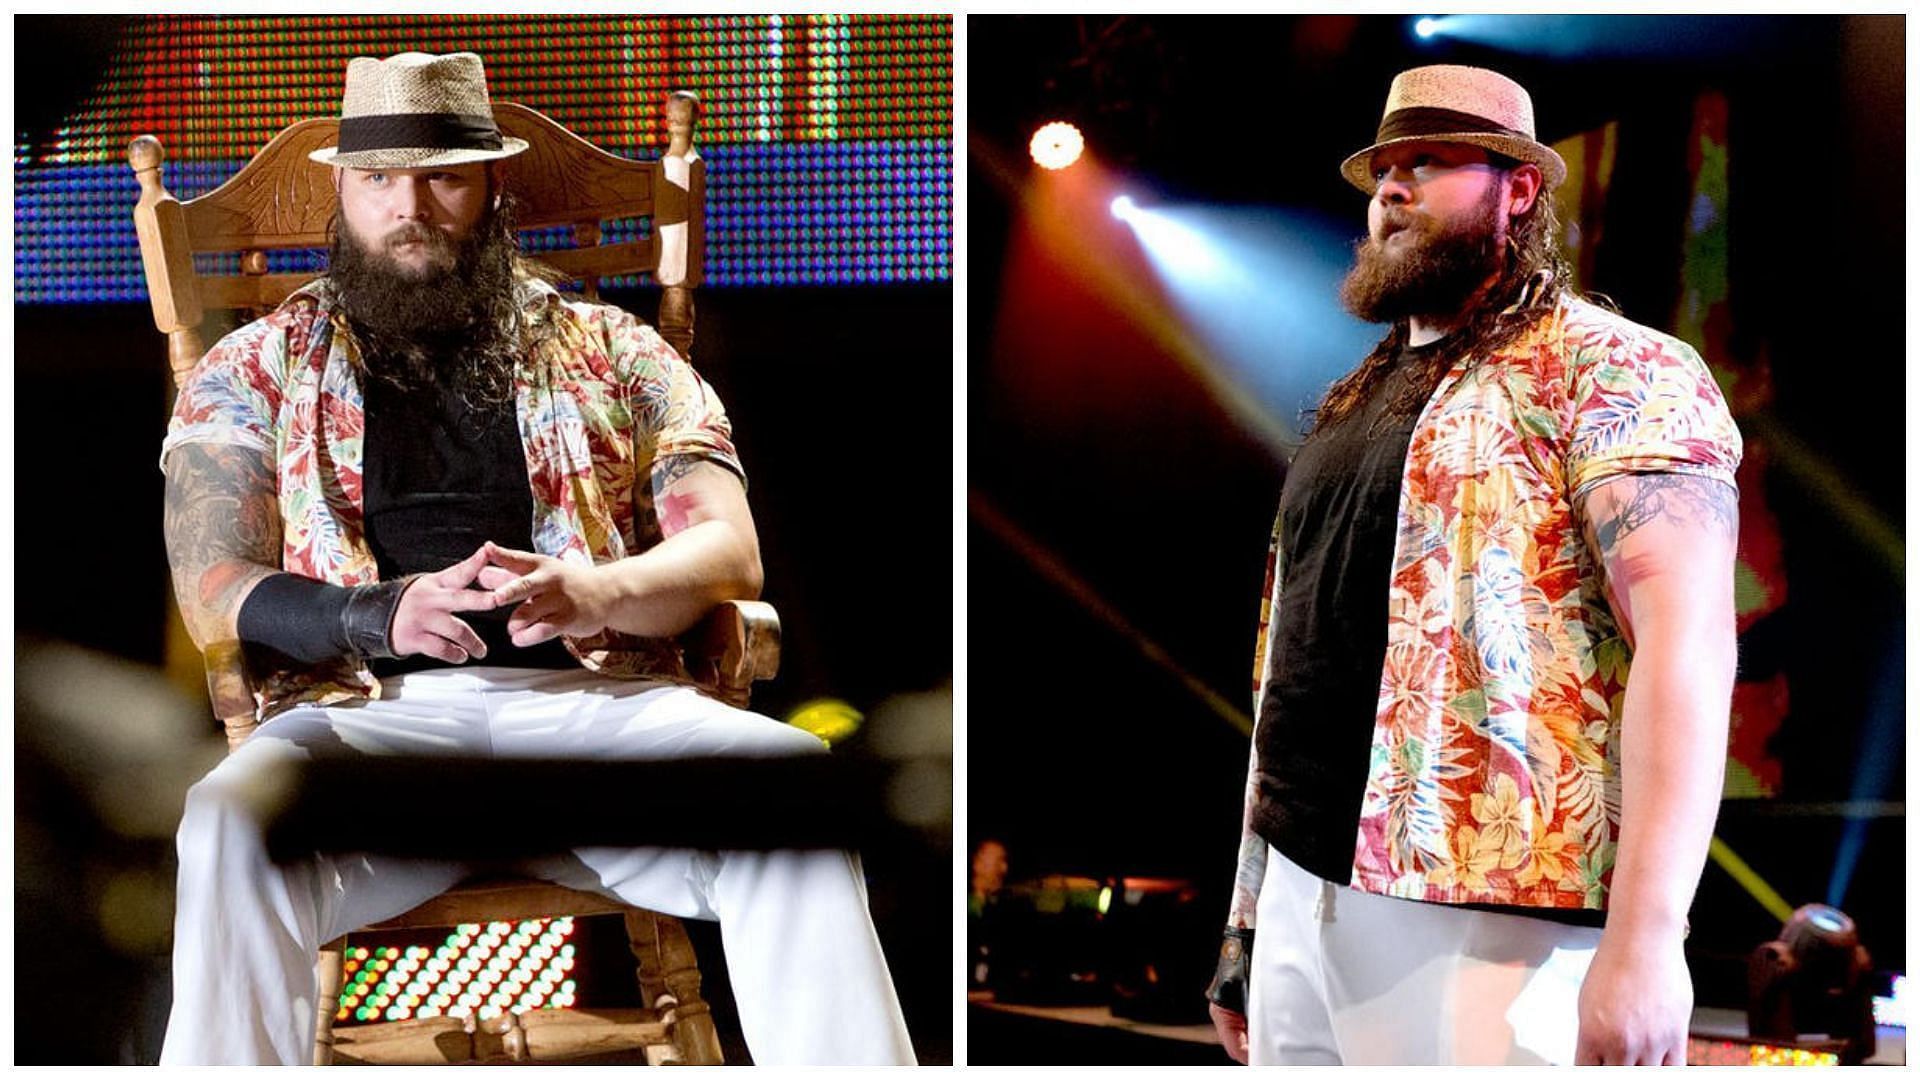 Another WWE Superstar inked a tribute to Bray Wyatt